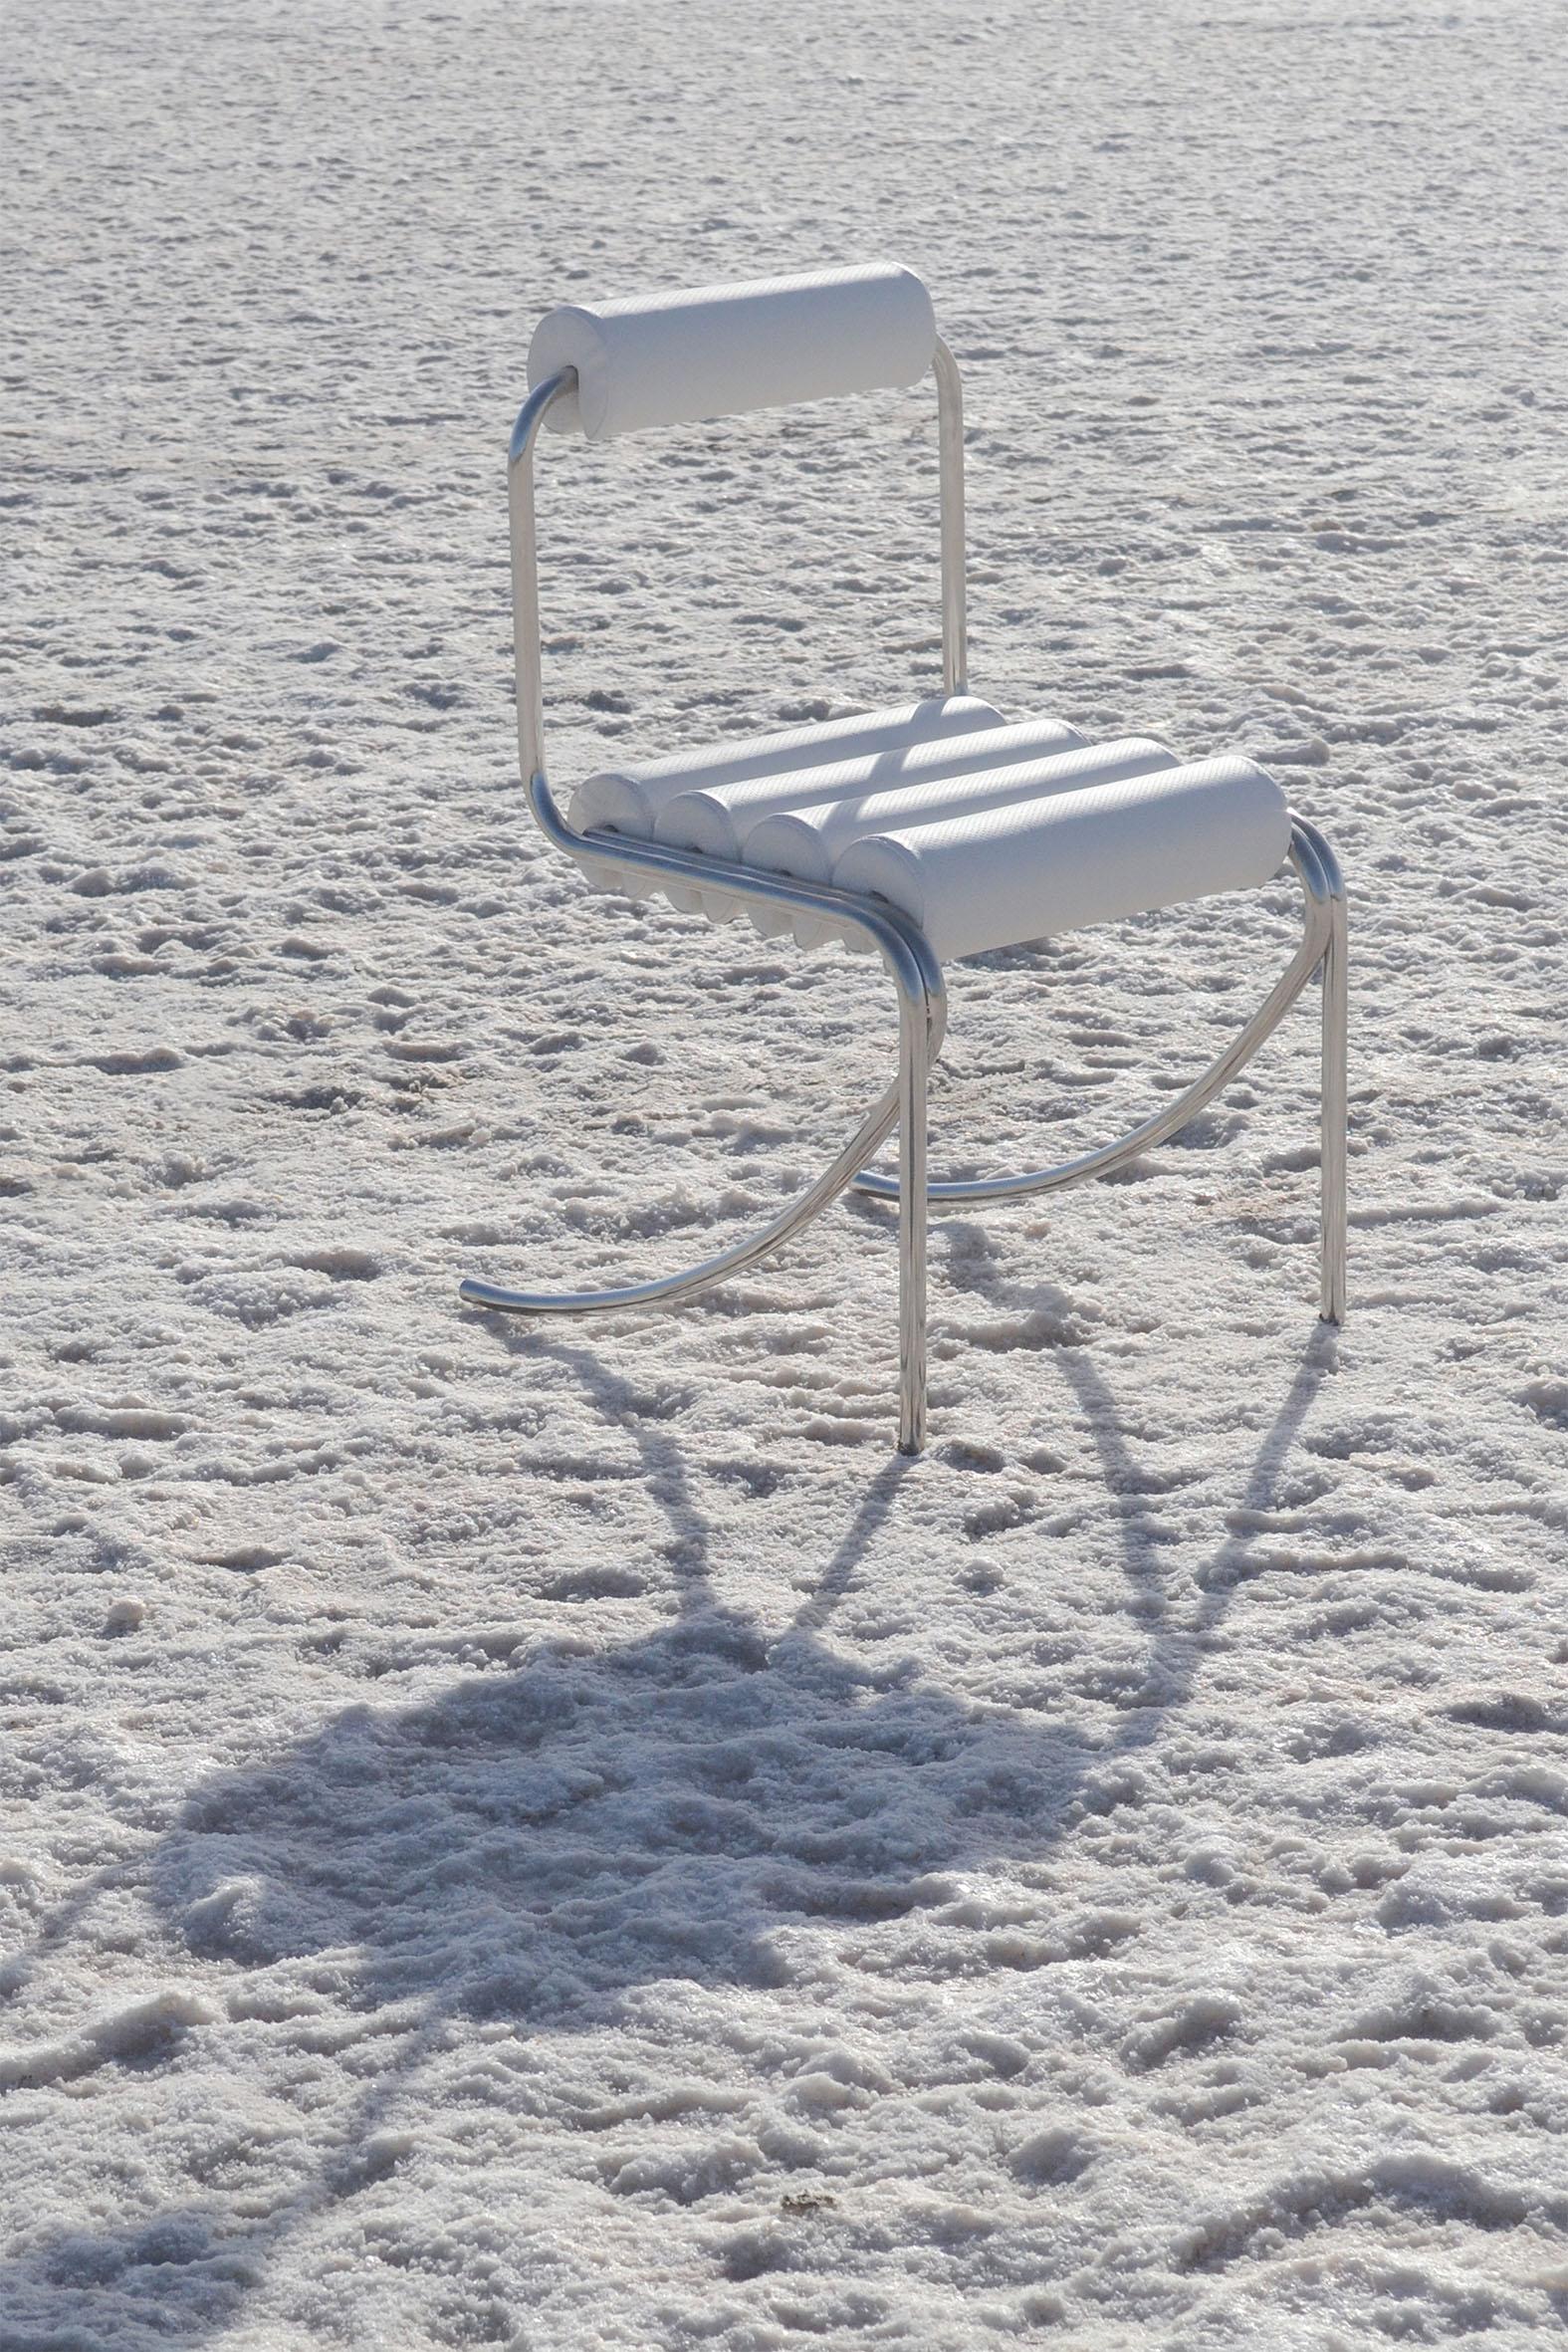 Elegg tubular chair B curved back stiles by Studio Christinekalia
Dimensions: W 55 x D 50 x H 85 cm.
Materials: stainless steel upholstered in marine leather.

Austere in appearance yet cordial to the human body, this chair design follows the